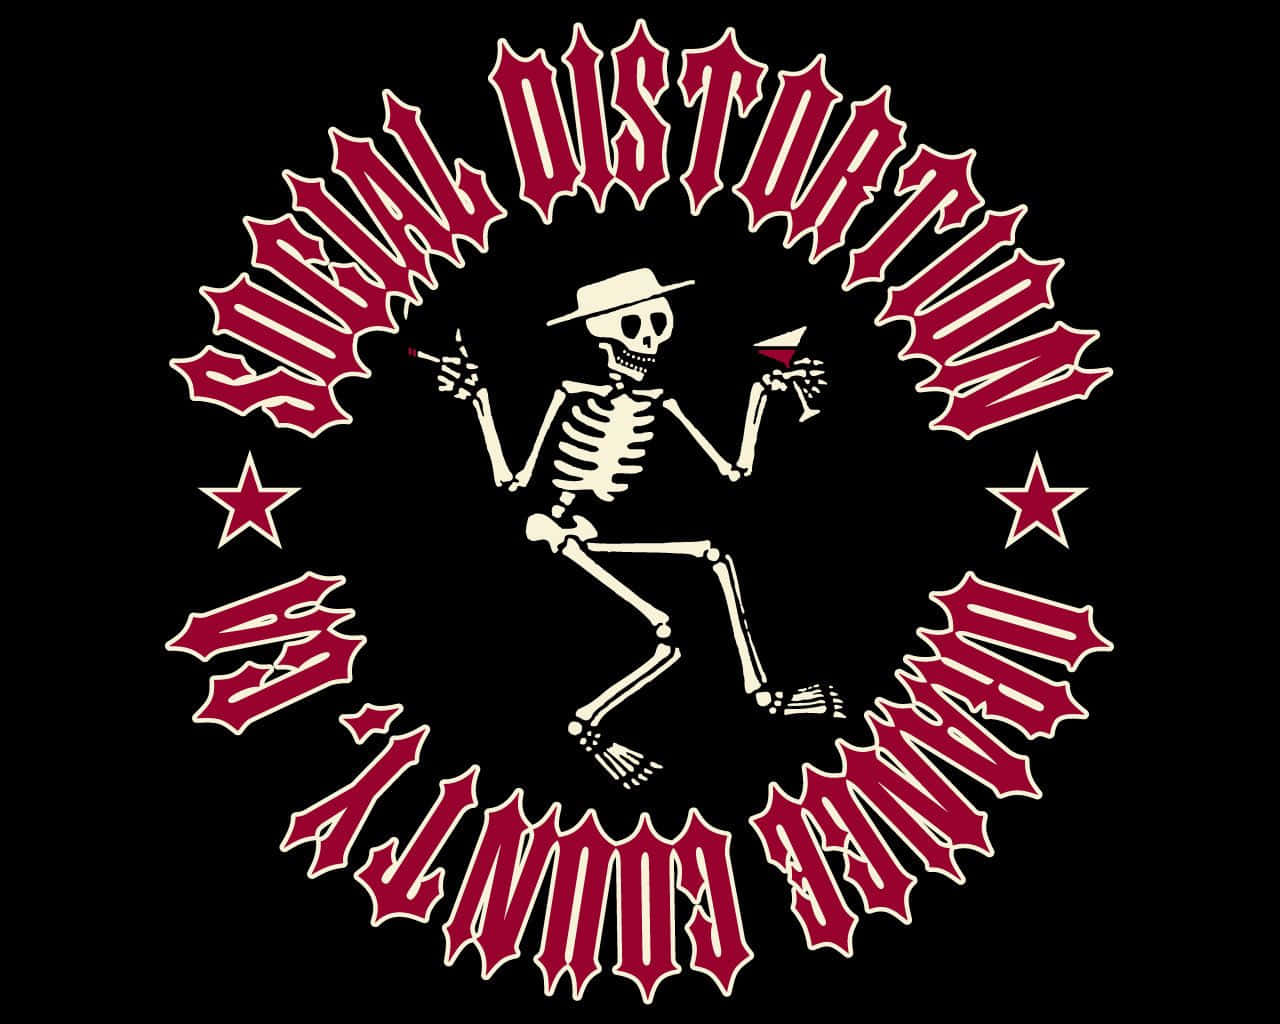 Captivating Live Performance By Social Distortion Background